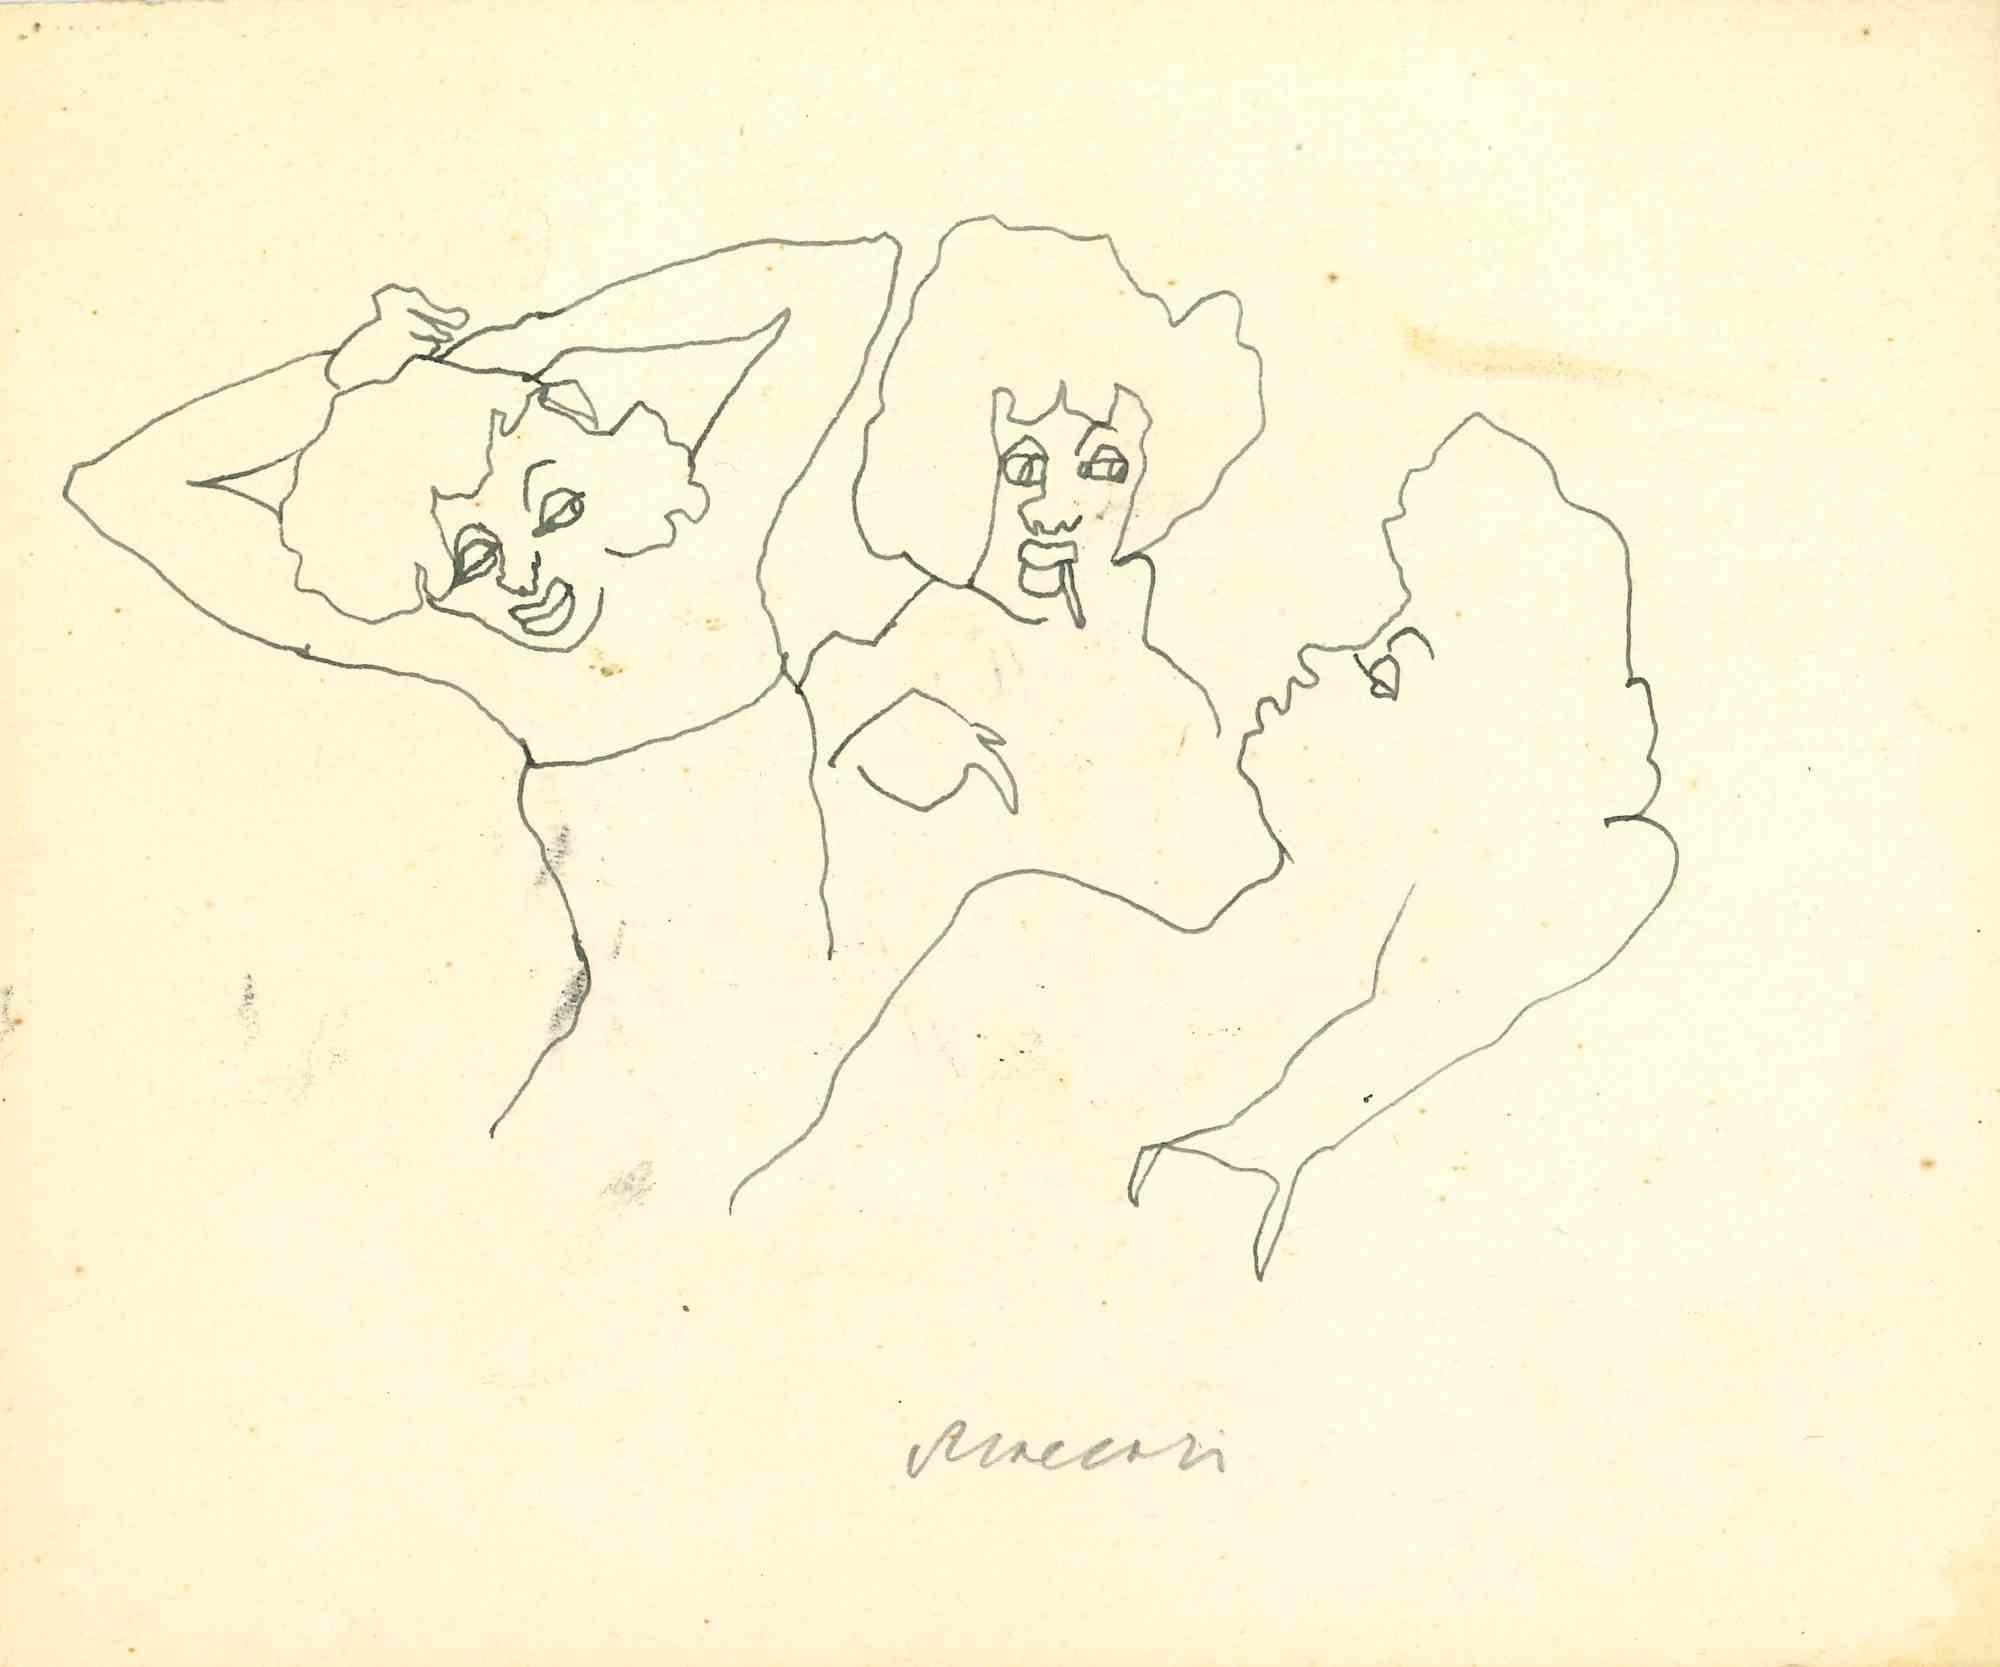 Seductive Woman is a pen Drawing realized by Mino Maccari  (1924-1989) in the 1950s.

Hand-signed on the lower margin.

Good condition.

Mino Maccari (Siena, 1924-Rome, June 16, 1989) was an Italian writer, painter, engraver and journalist, winner